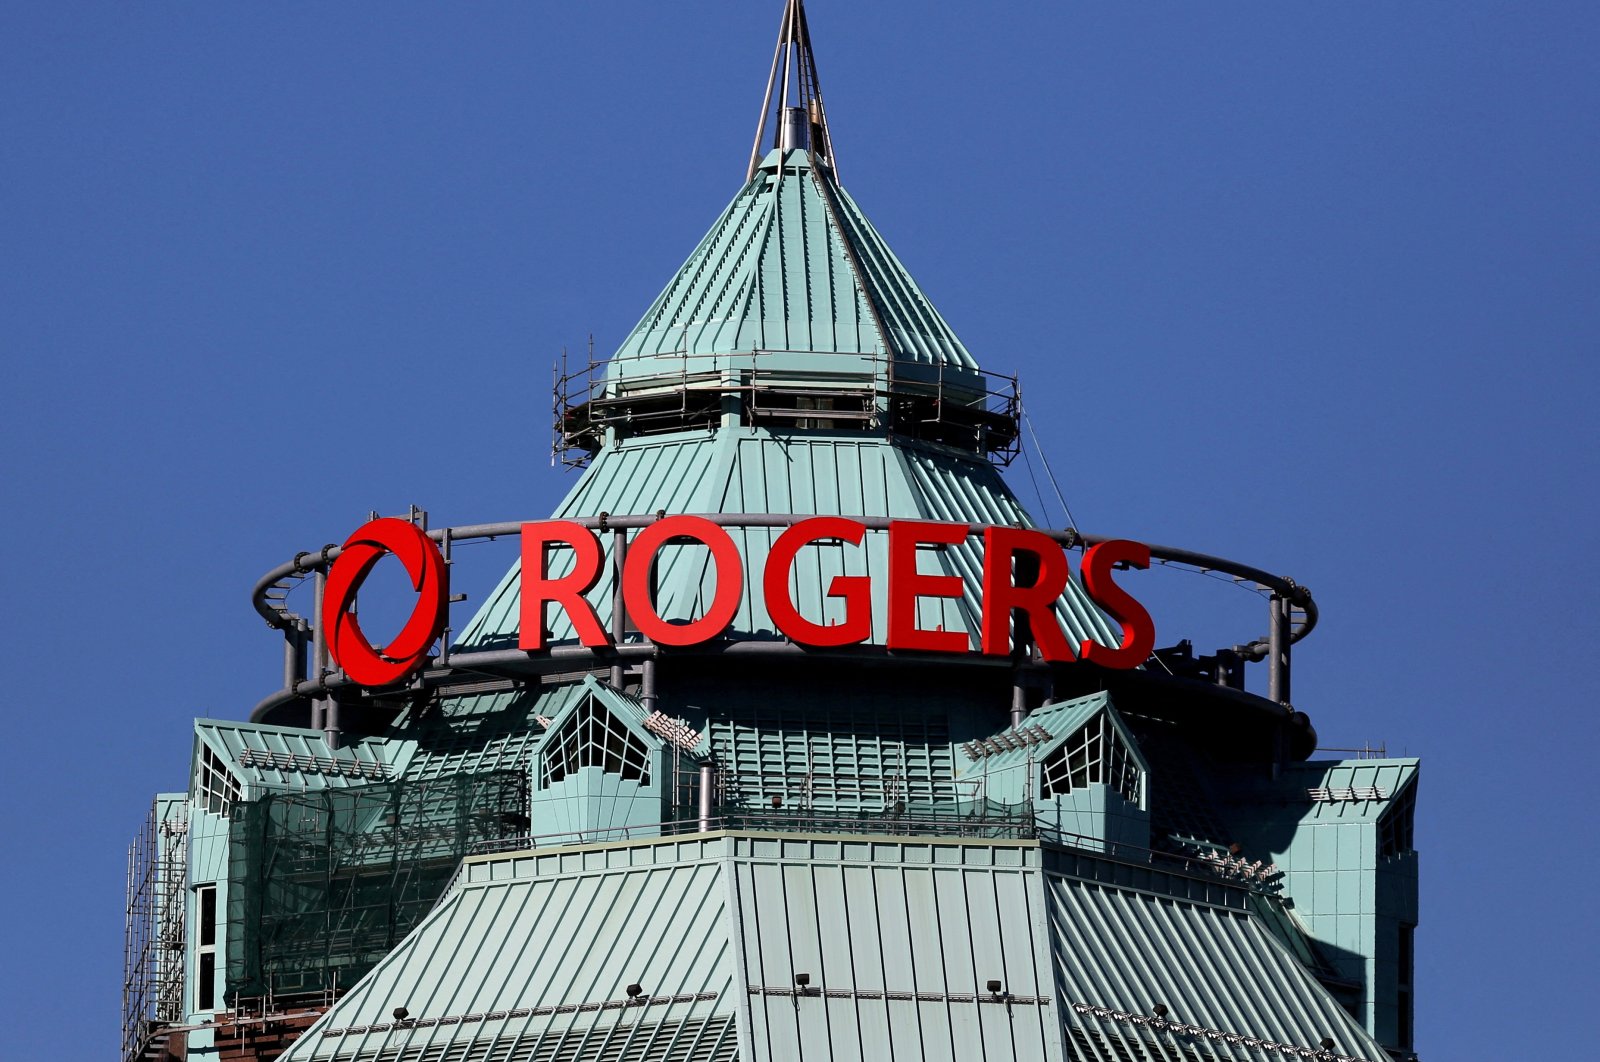 The headquarters of Rogers Communications Inc. is seen in Toronto, Ontario, Canada, Nov. 6, 2016. (Reuters File Photo)